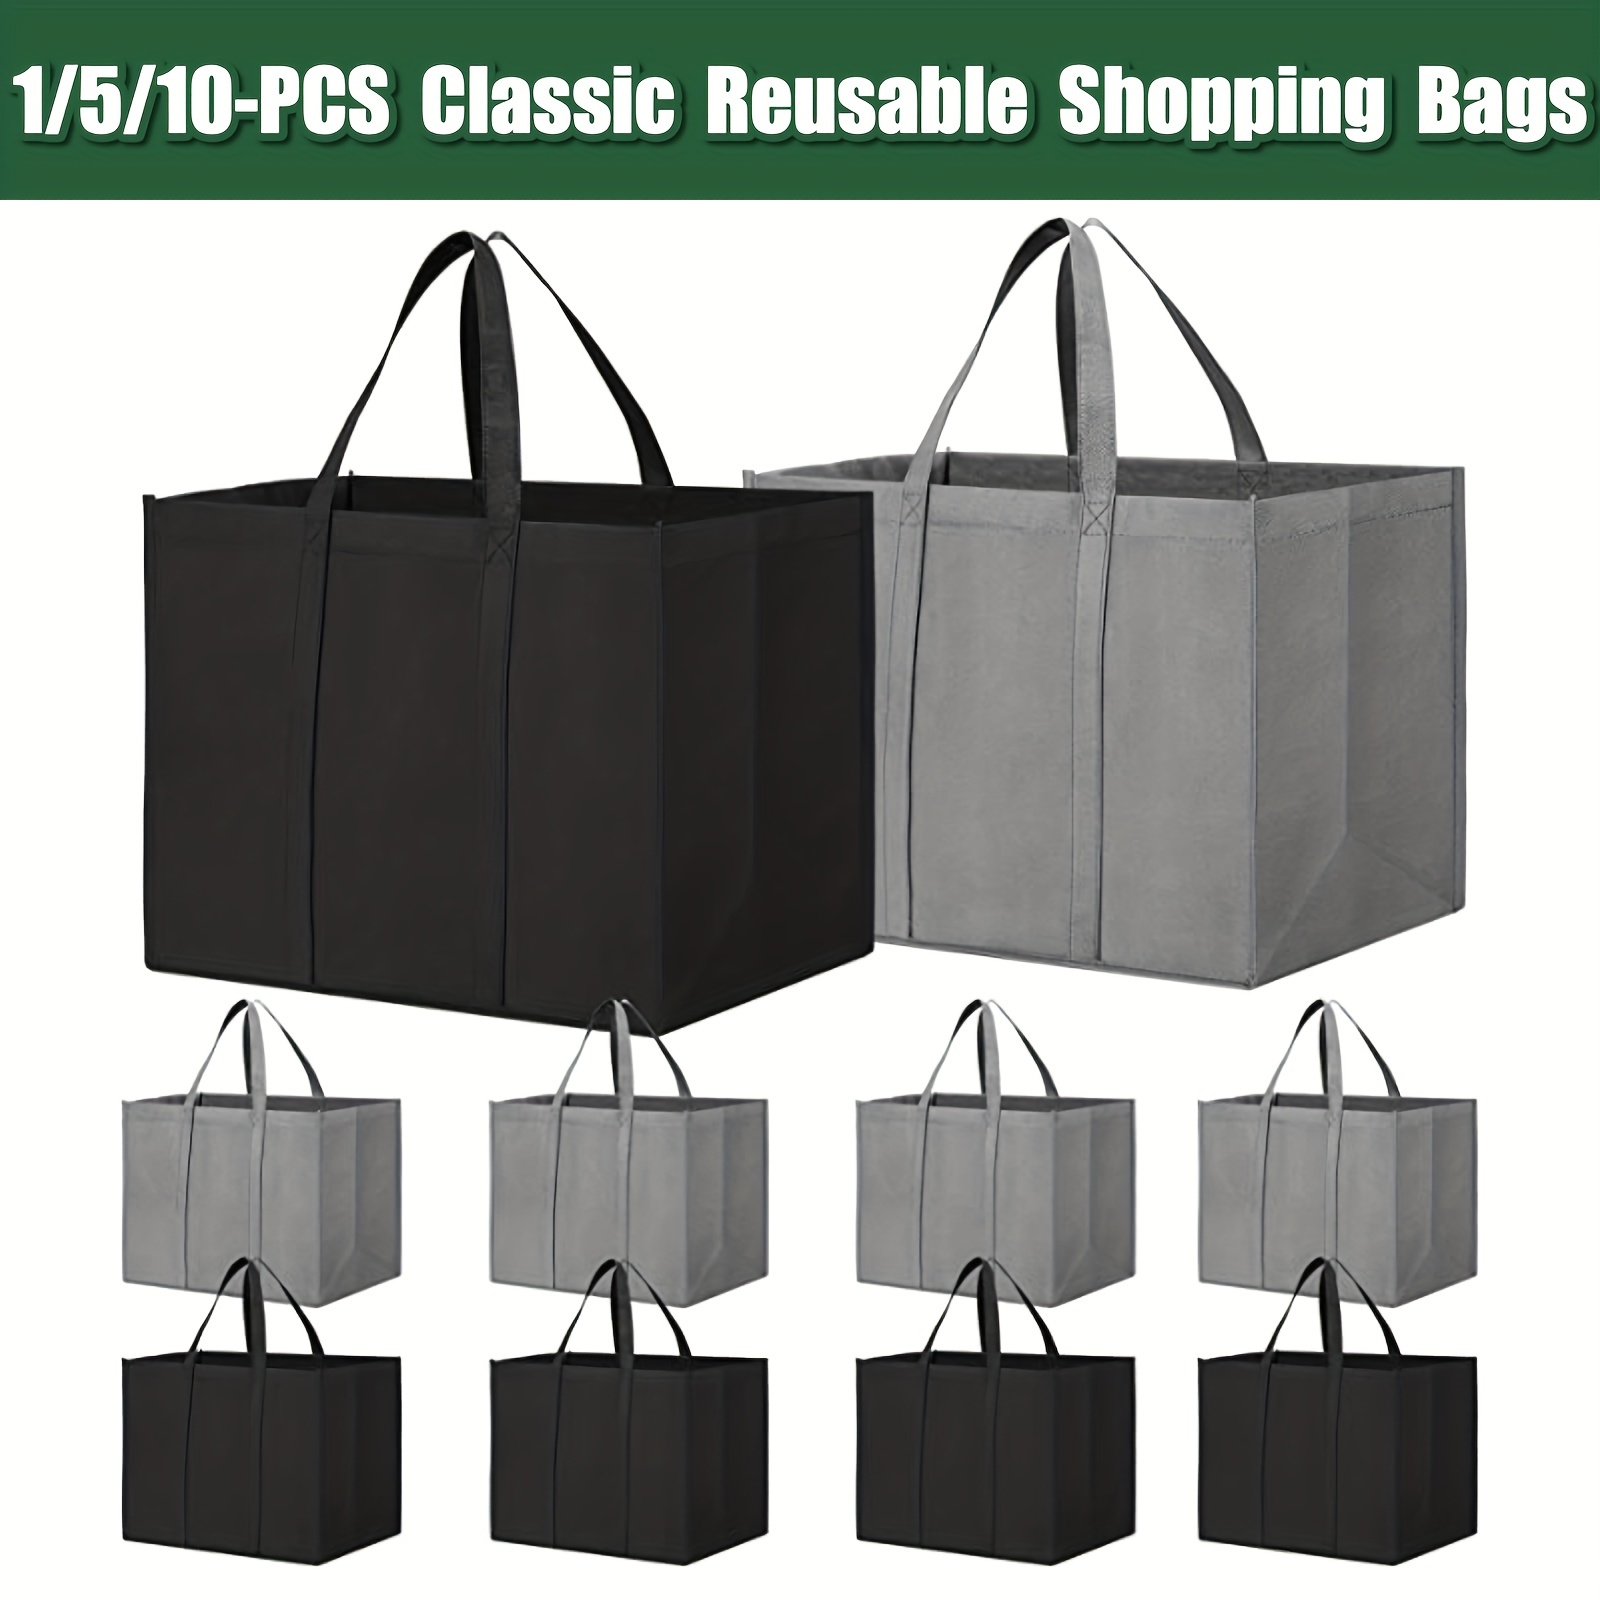 Reusable Grocery Bags with Handles Foldable Washable Shopping Bags 